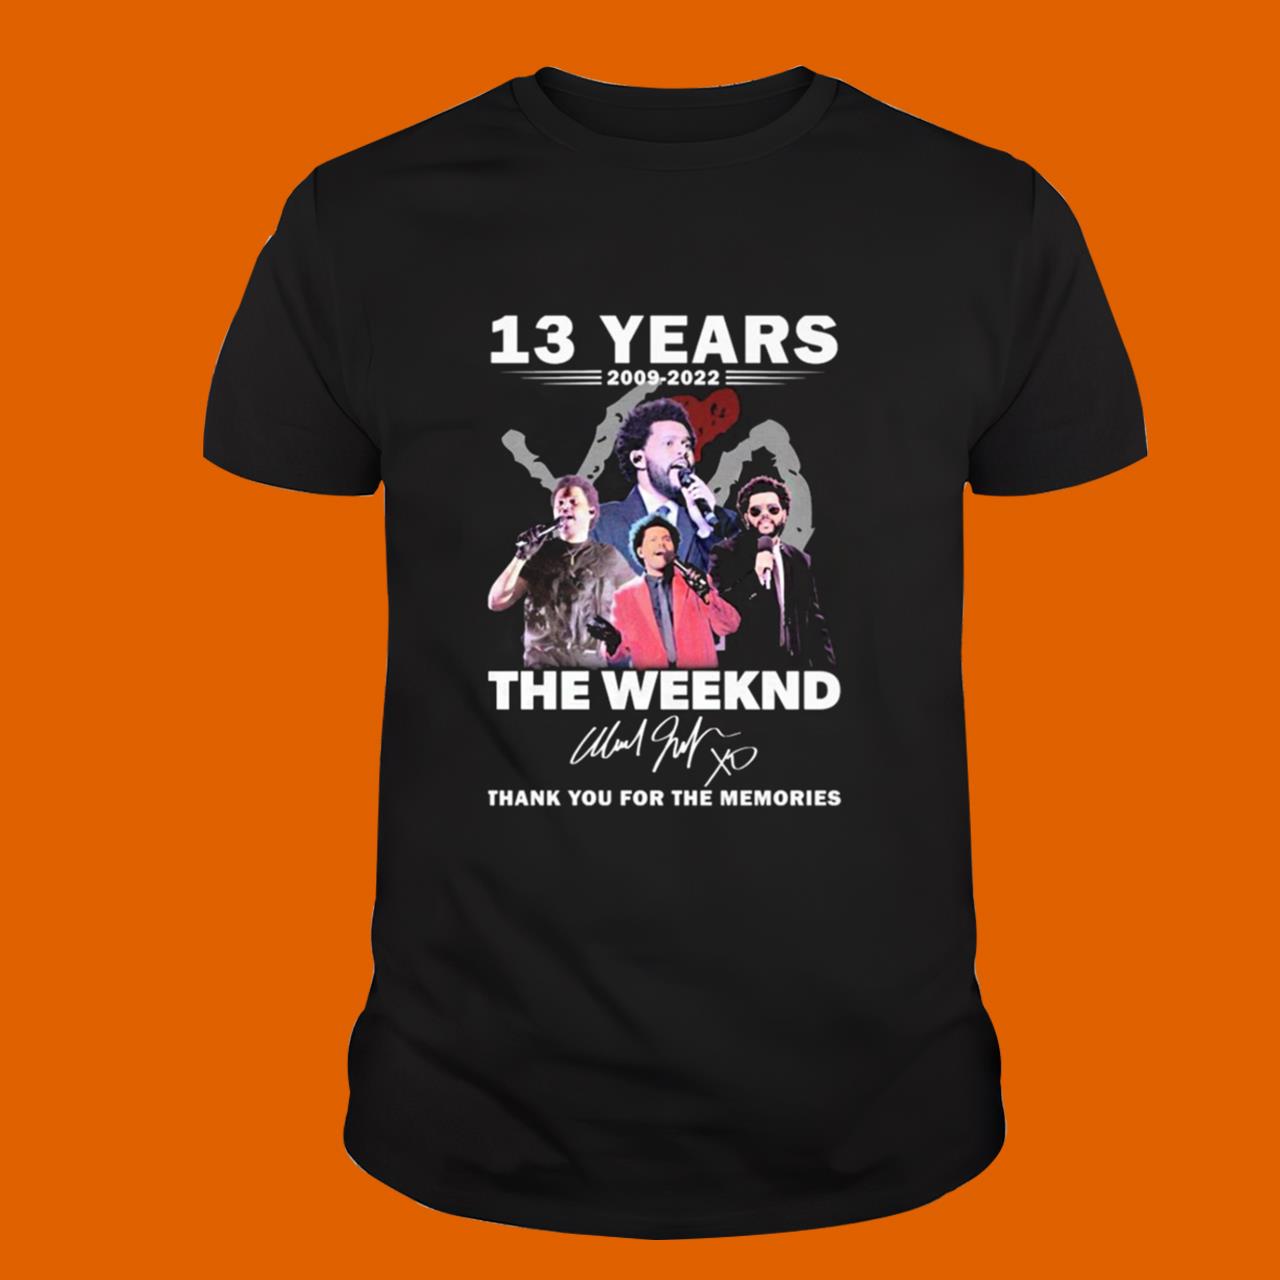 The Weeknd 13 Years 2009-2022 Thank You For The Memories Signatures Shirt